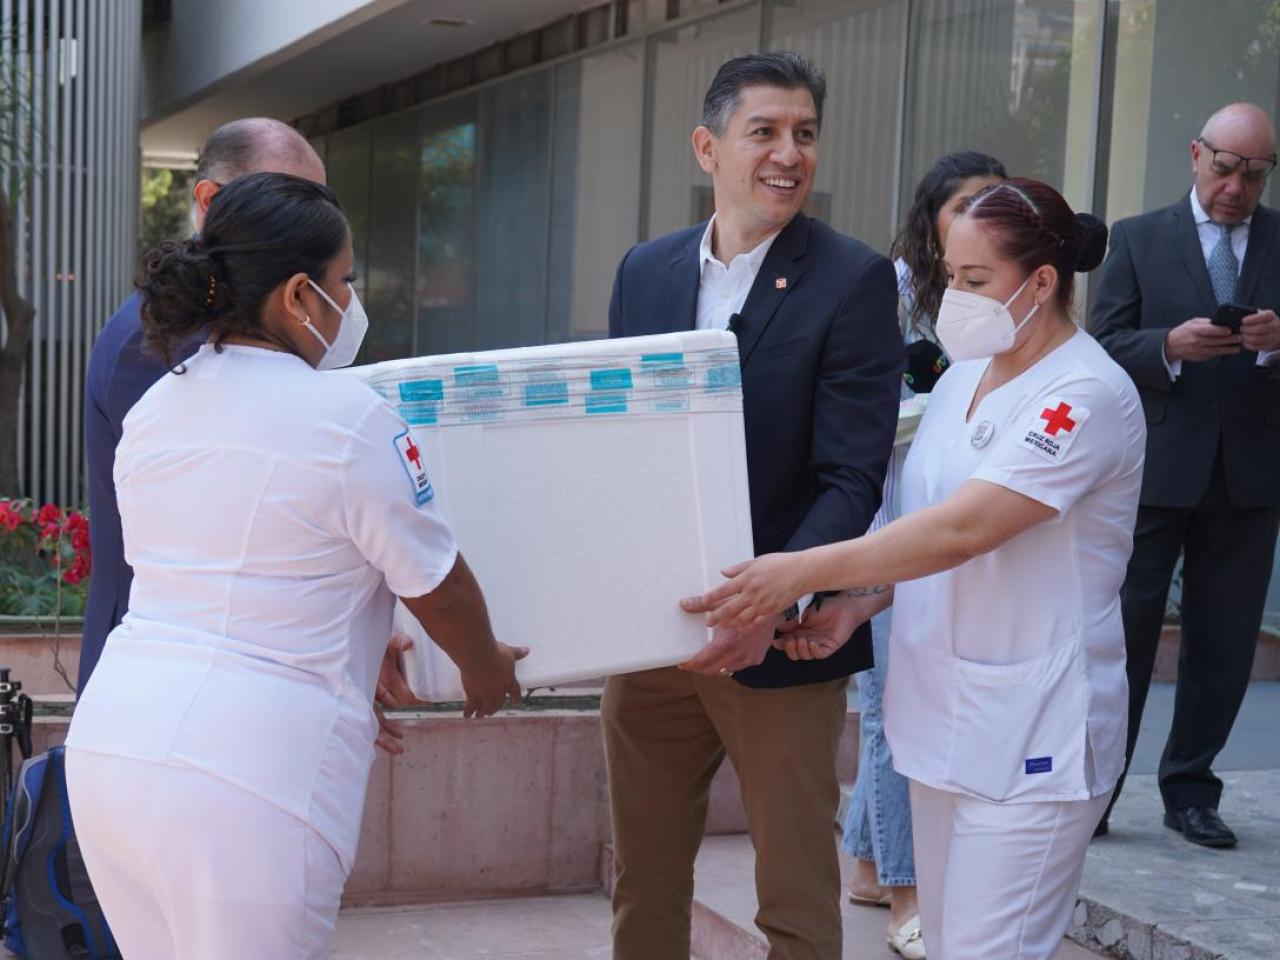 Twelve thousand doses of Covid-19 vaccine, provided by Pfizer Mexico and coordinated by Direct Relief, arrived at the National Training and Training Center of the Red Cross located in Toluca, Mexico. (Direct Relief photo)